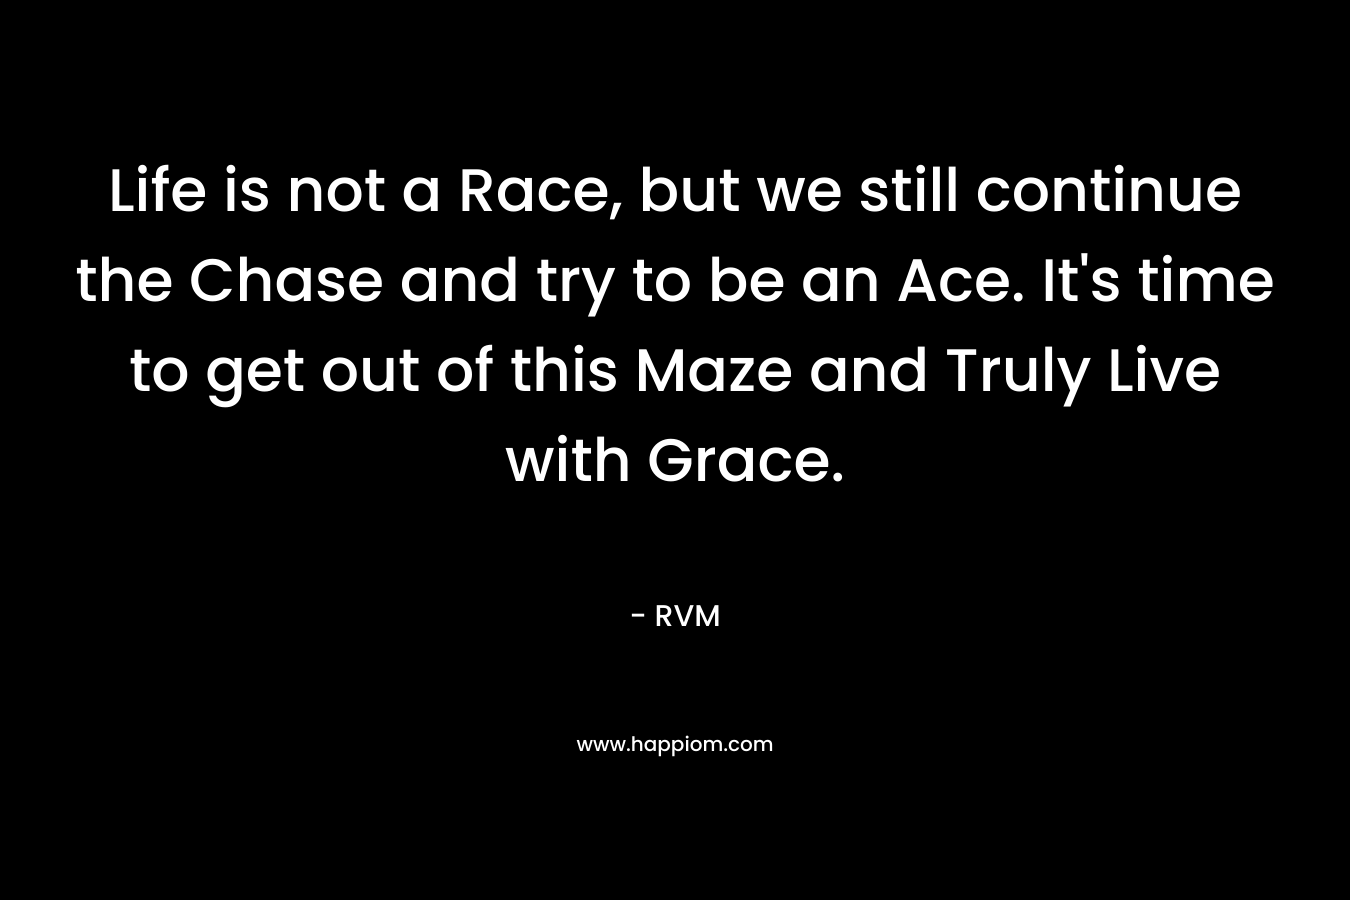 Life is not a Race, but we still continue the Chase and try to be an Ace. It's time to get out of this Maze and Truly Live with Grace.